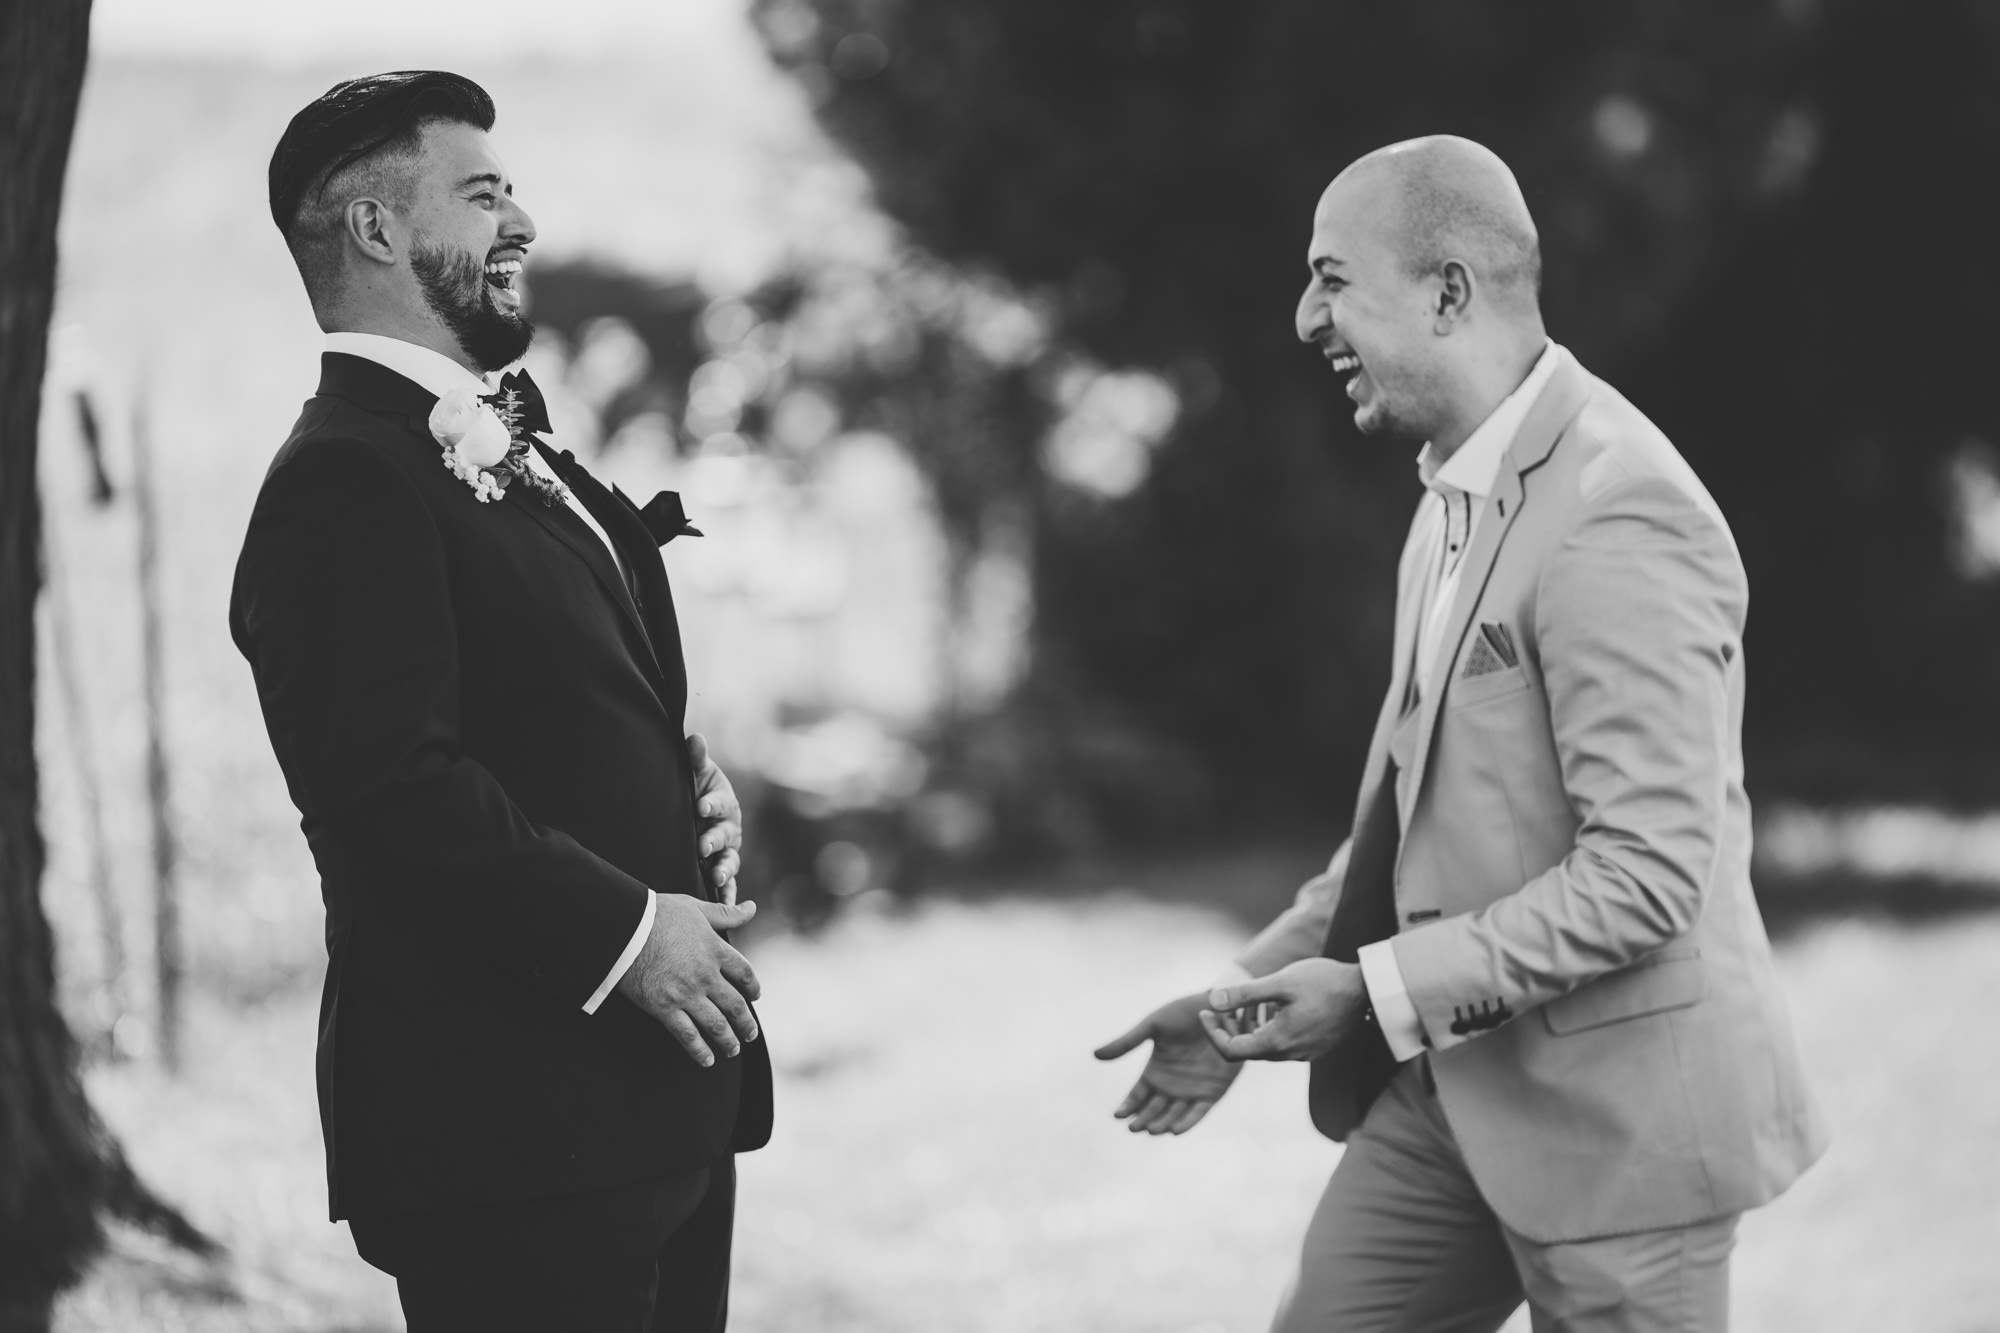 groom and his best friend laughing together